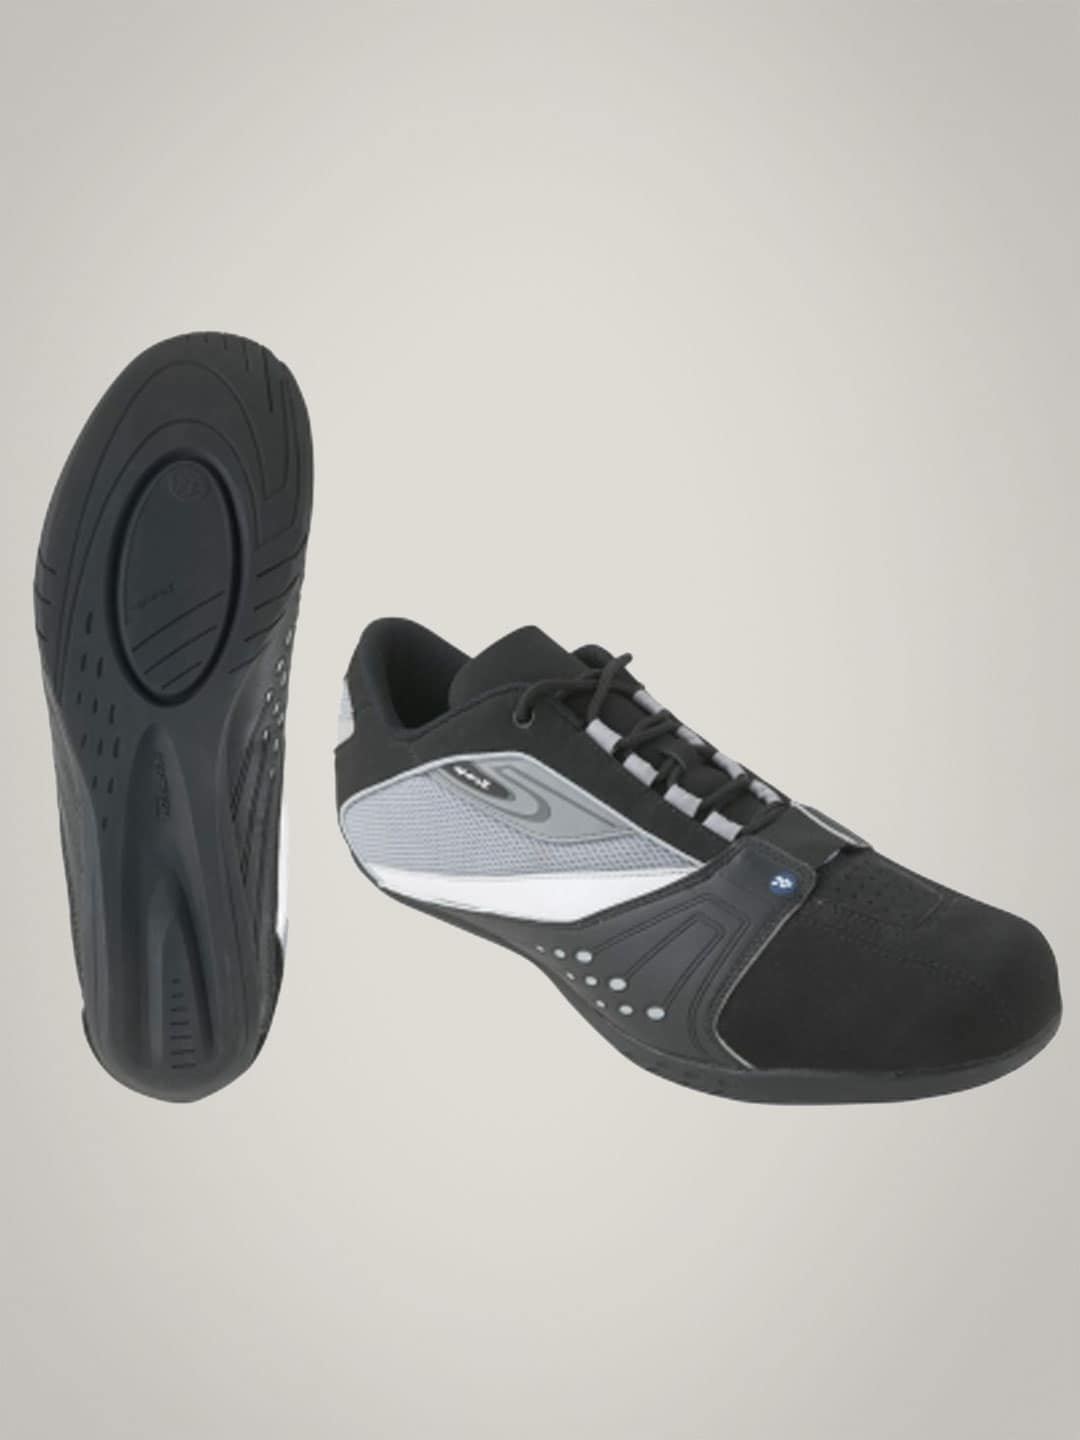 Btwin Sport 5 Shoes